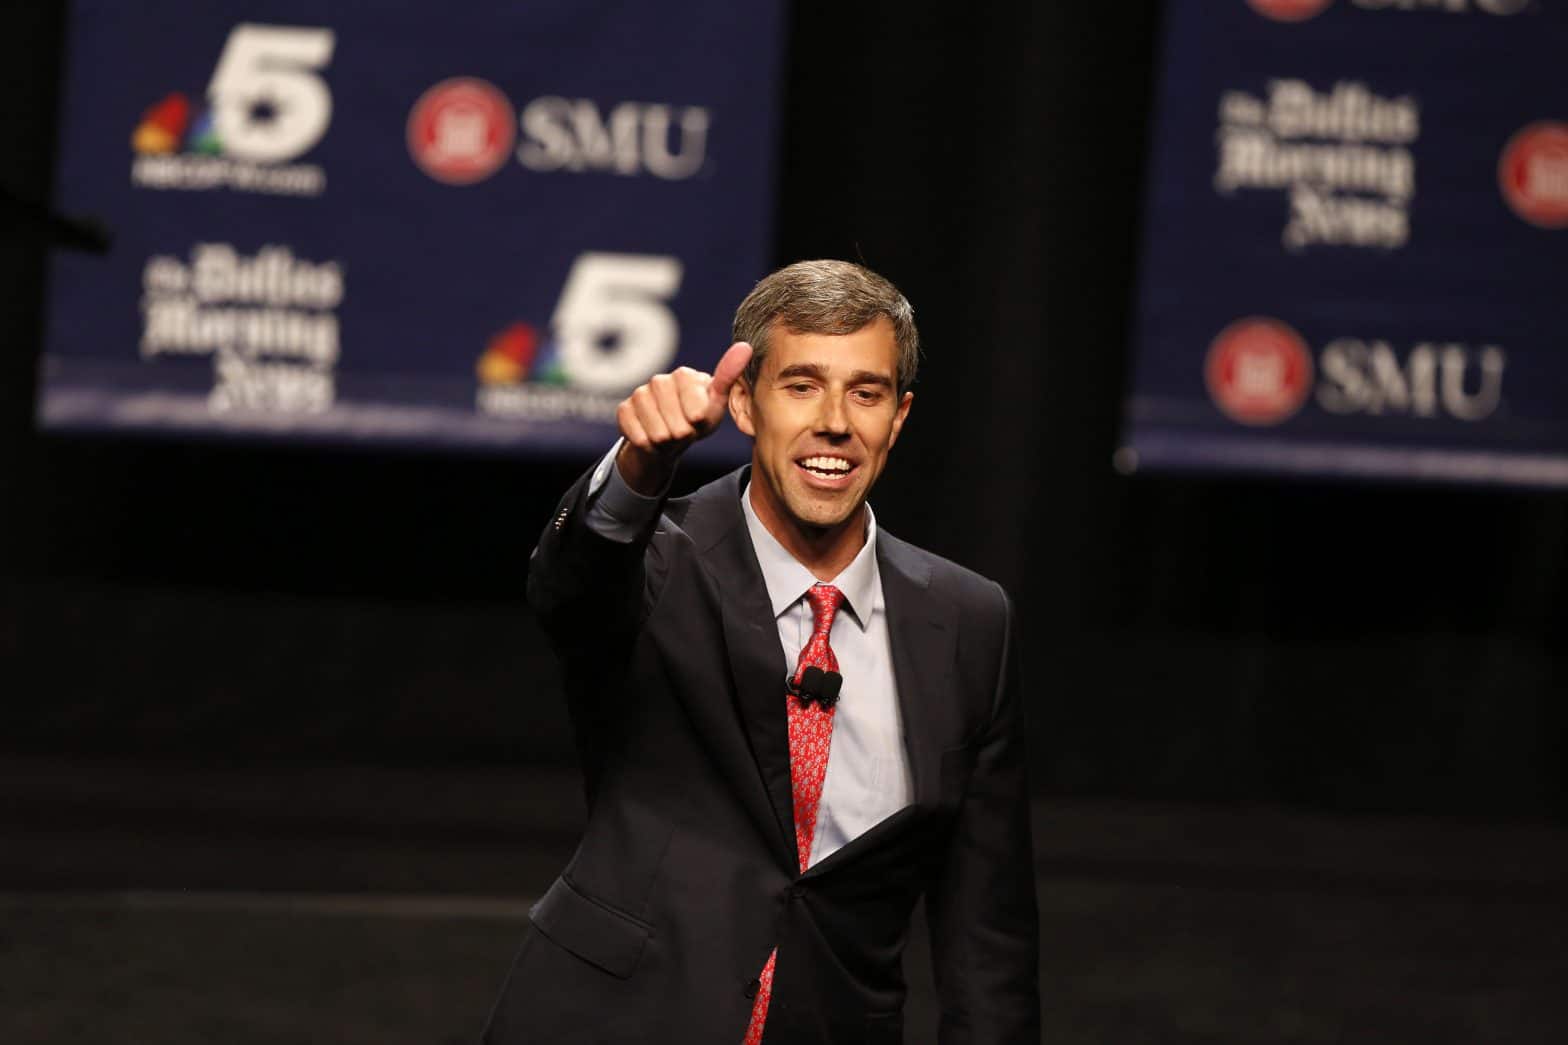 O’Rourke Makes It Official, He’s Joining The 2020 Presidential Contest